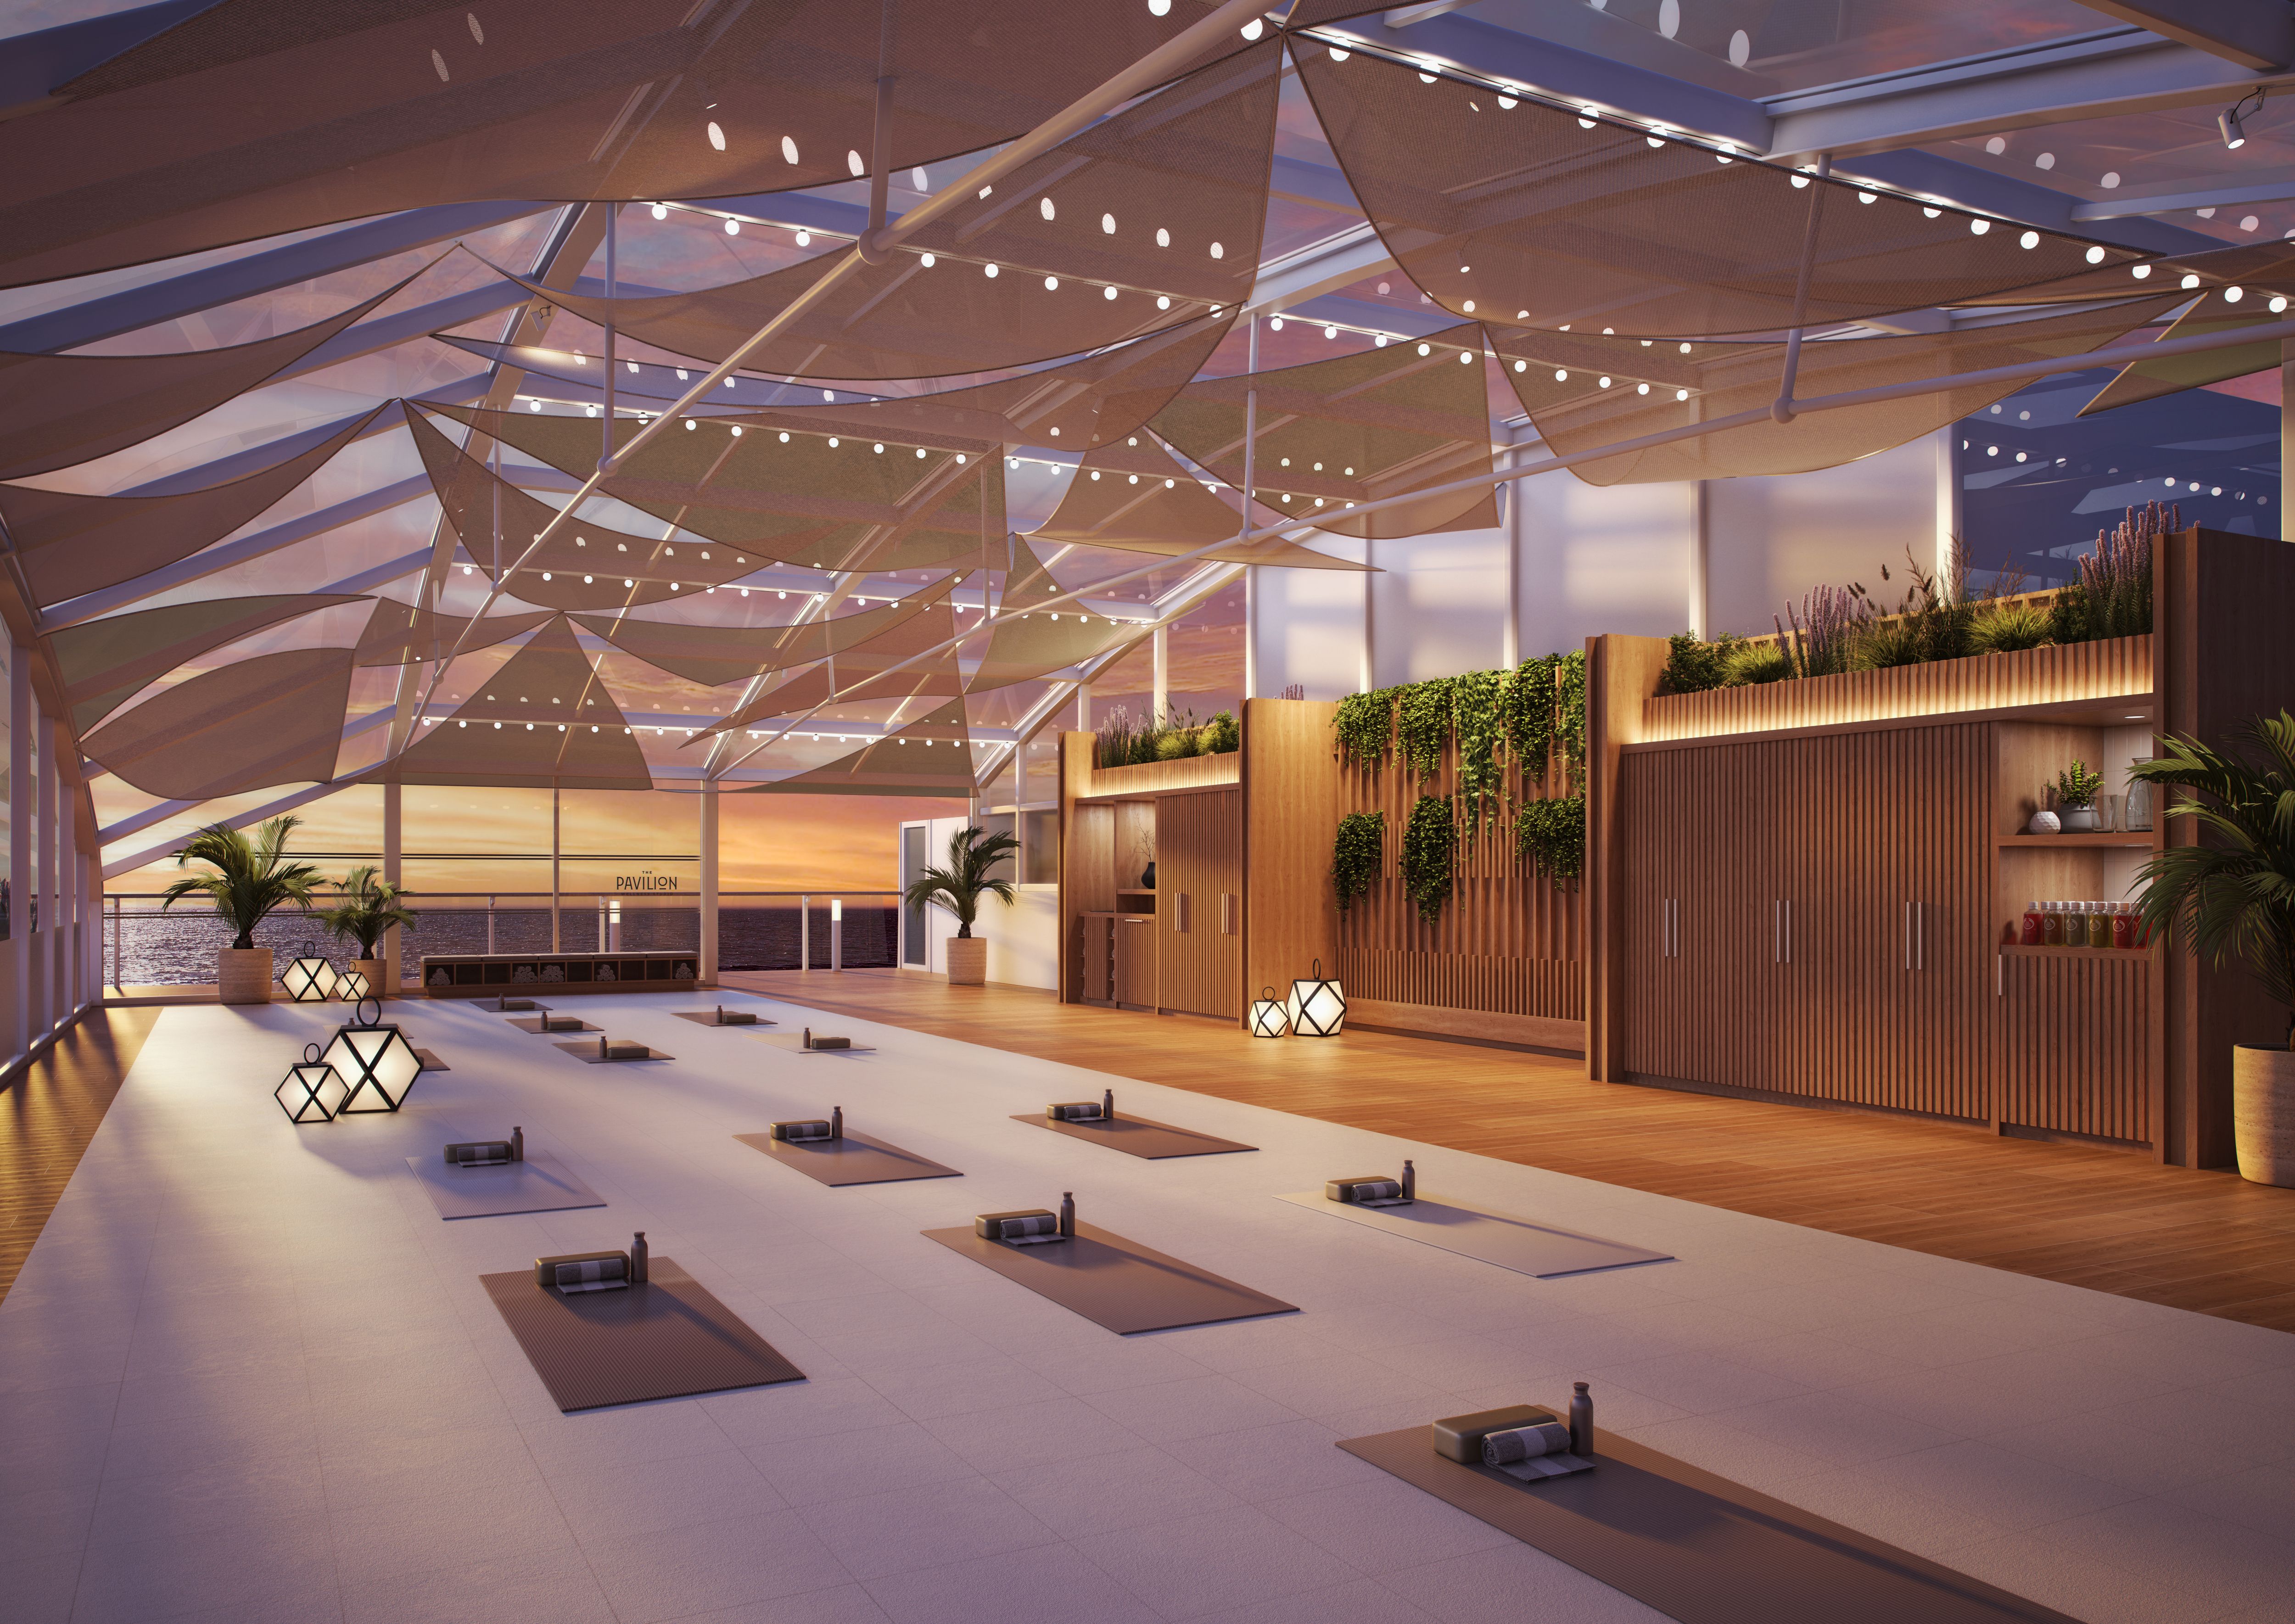 Cunard Queen Anne wellness studio at dusk, with yoga mats and atmospheric lighting for relaxation sessions.